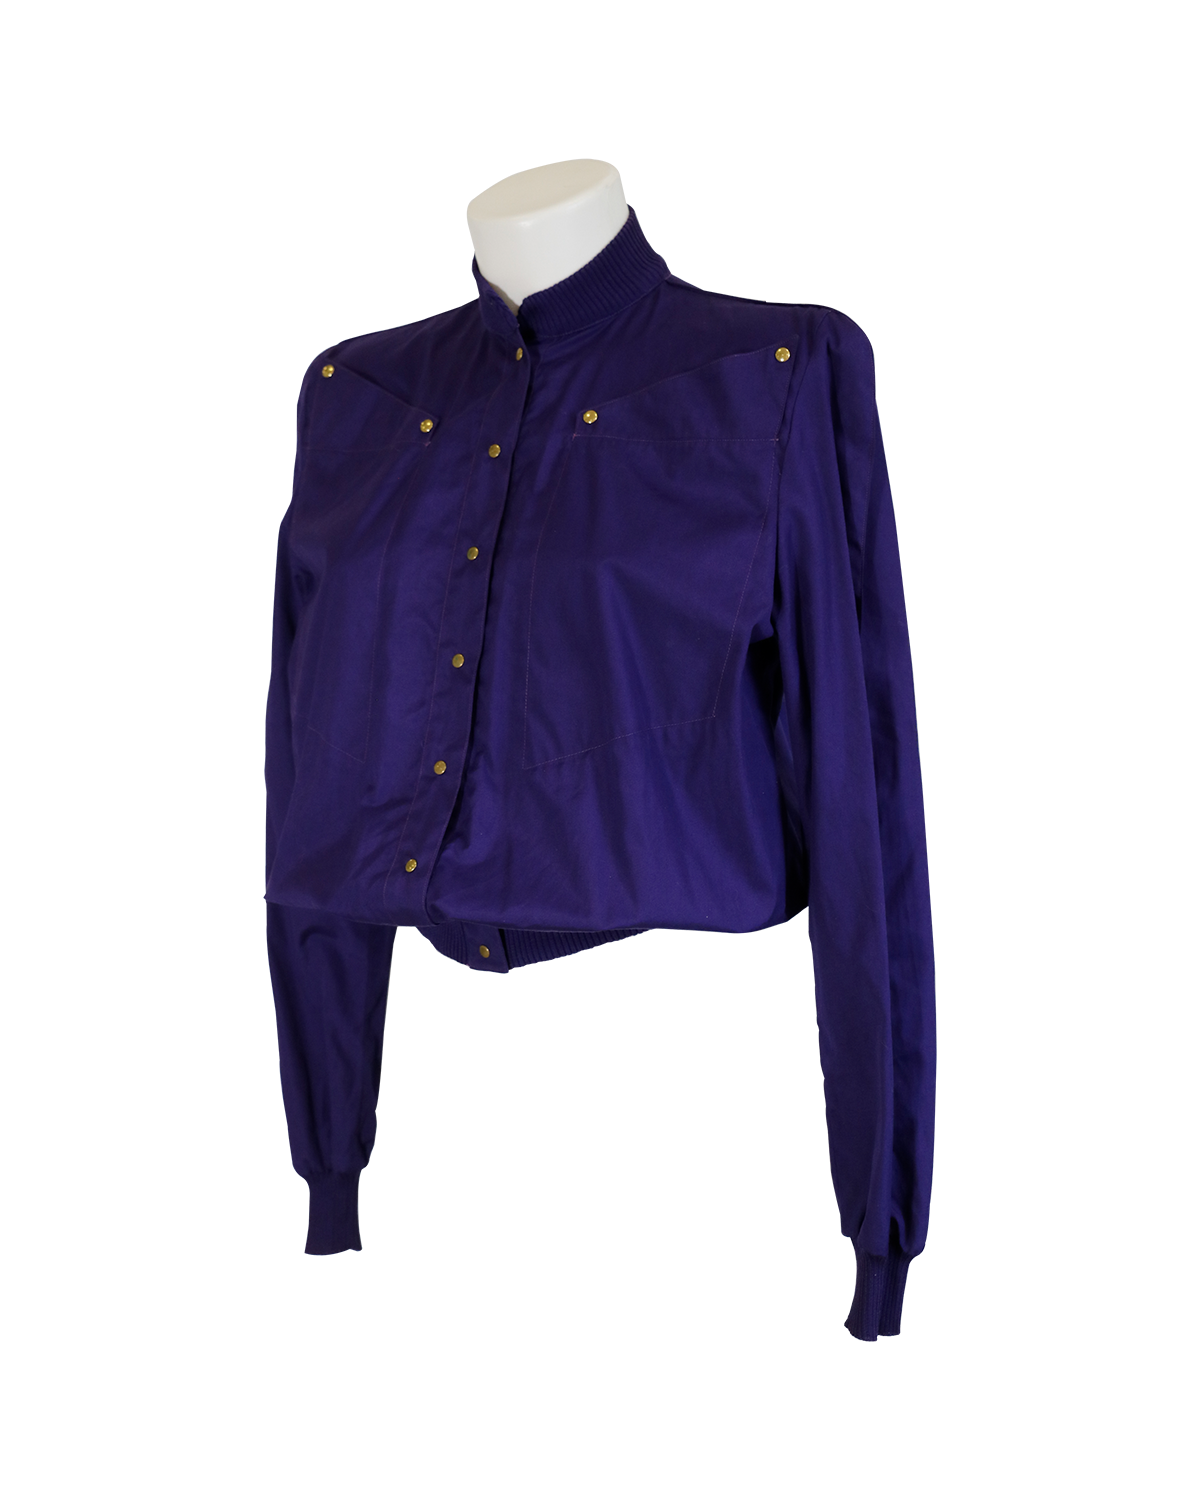 Thierry Mugler Violet Jacket from 1990s